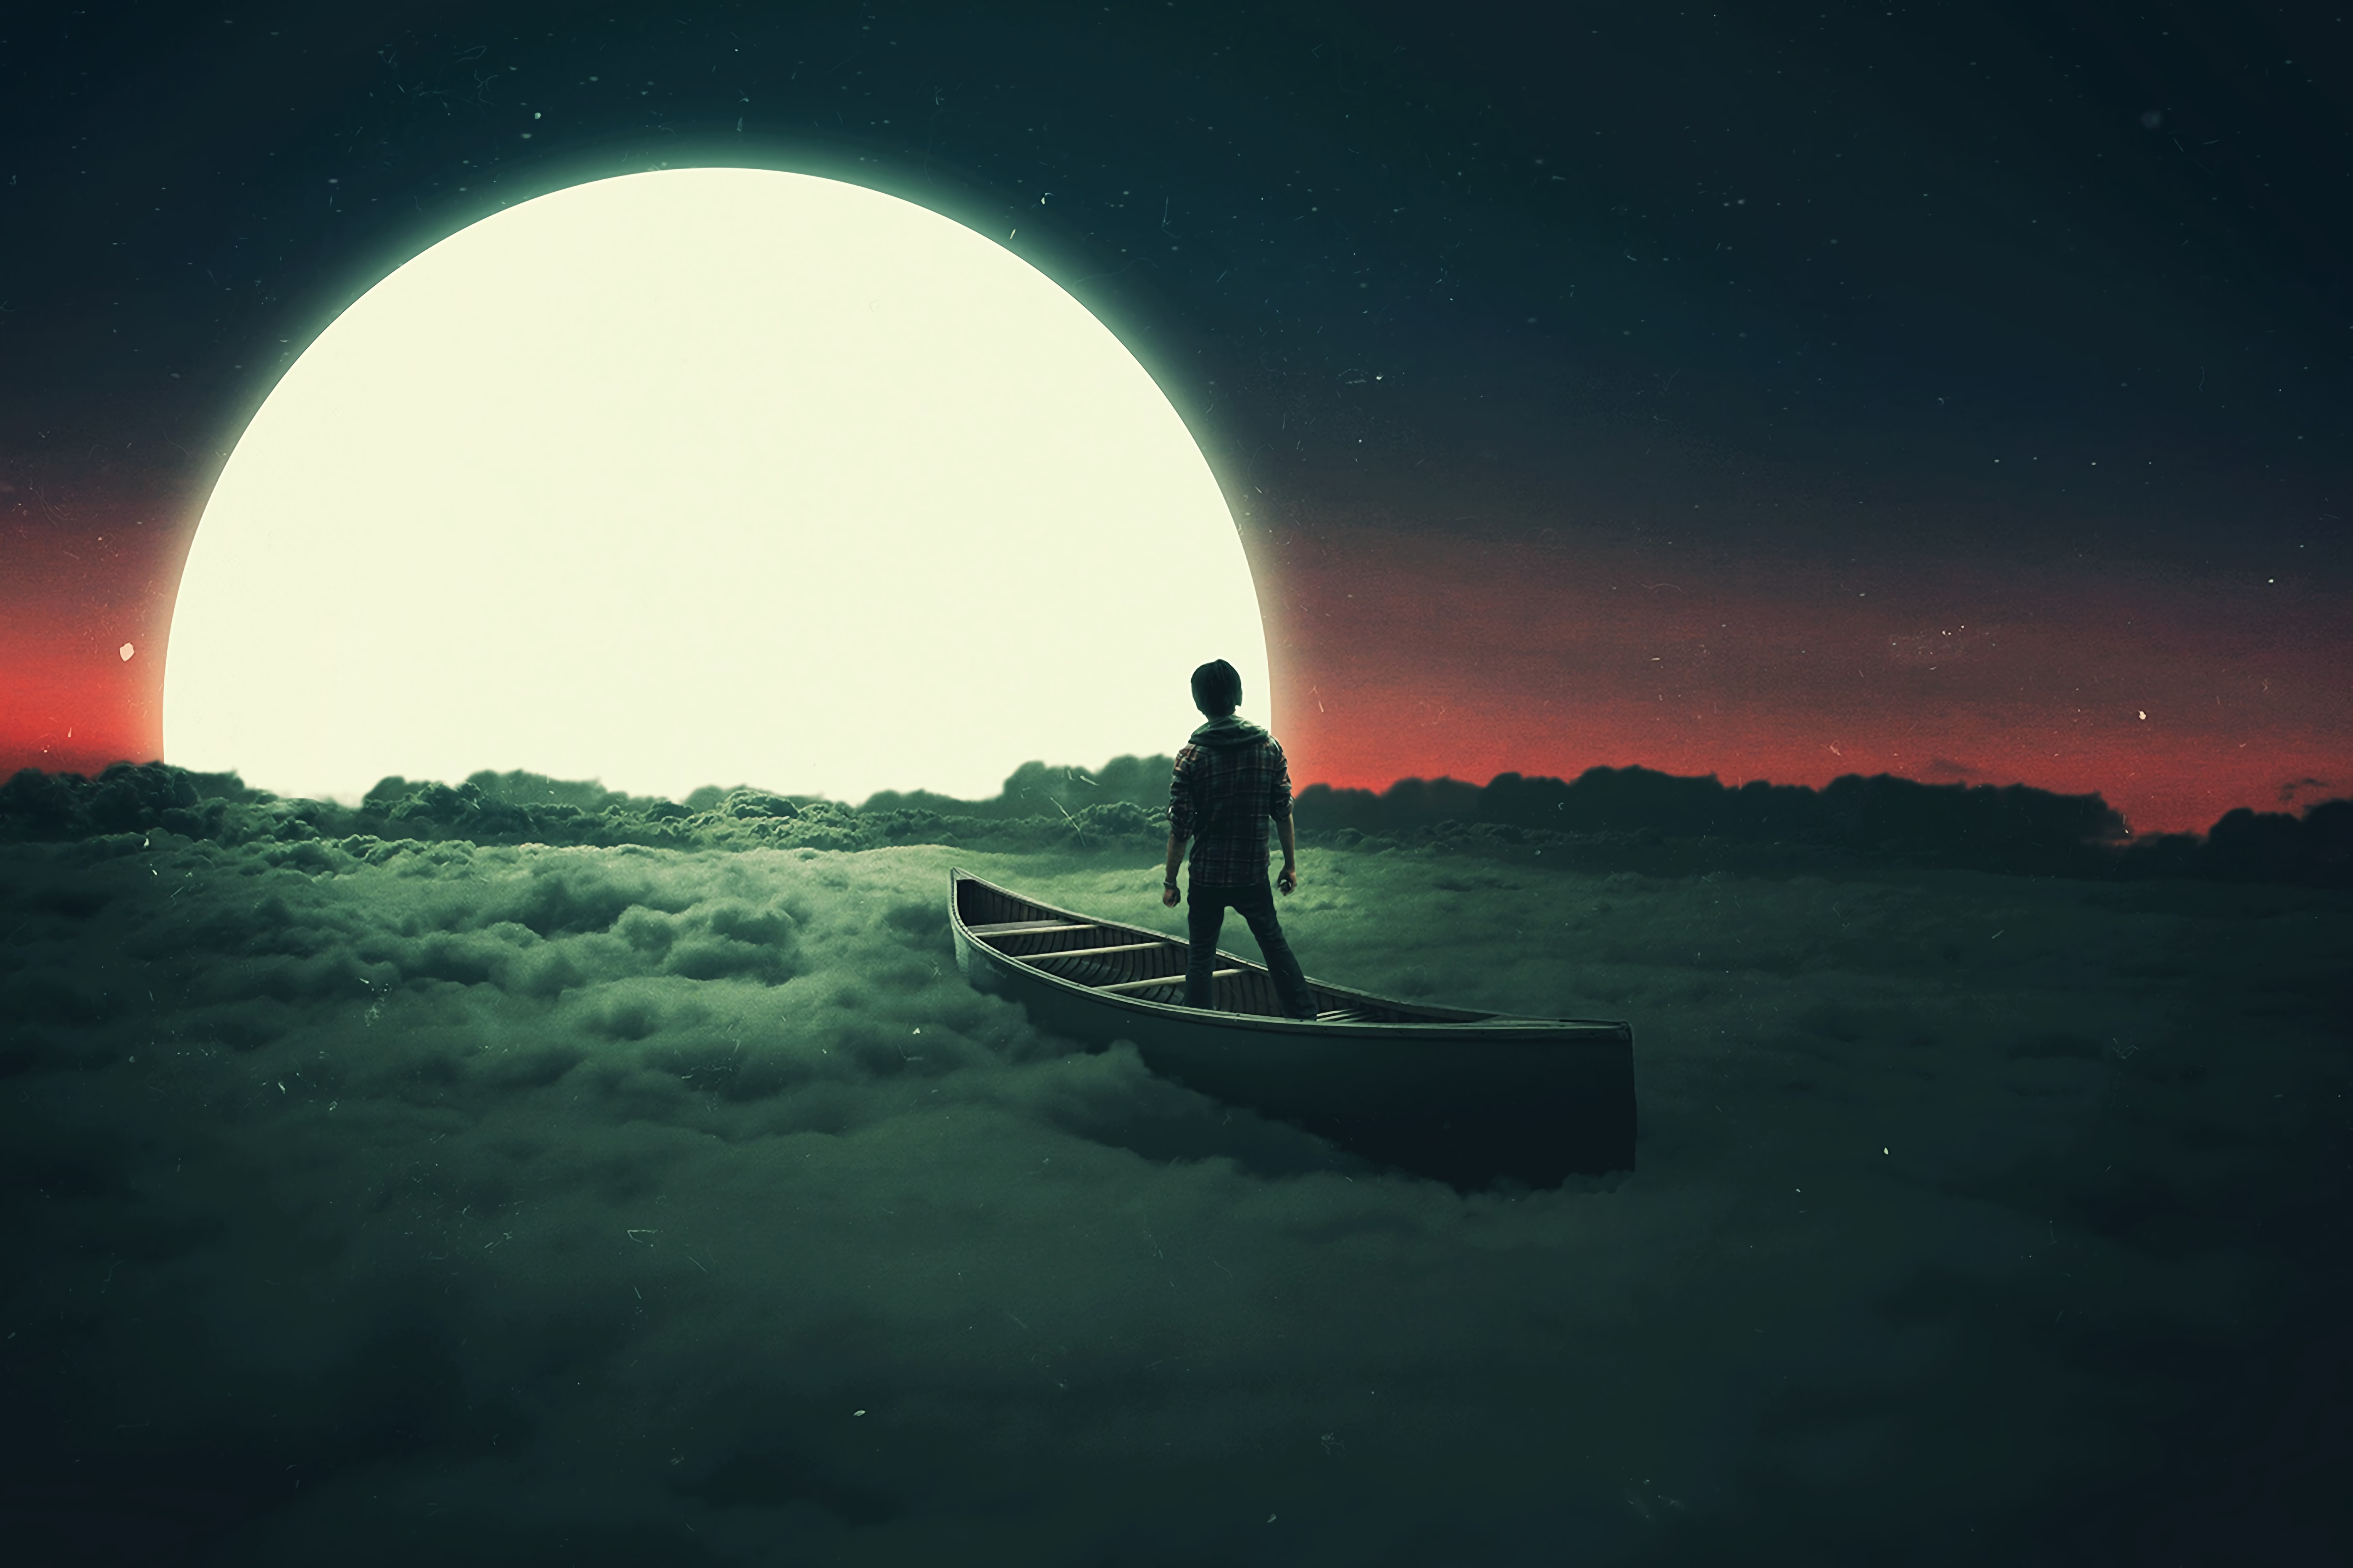 moon, miscellanea, silhouette, miscellaneous, loneliness, boat, lonely, surrealism Full HD